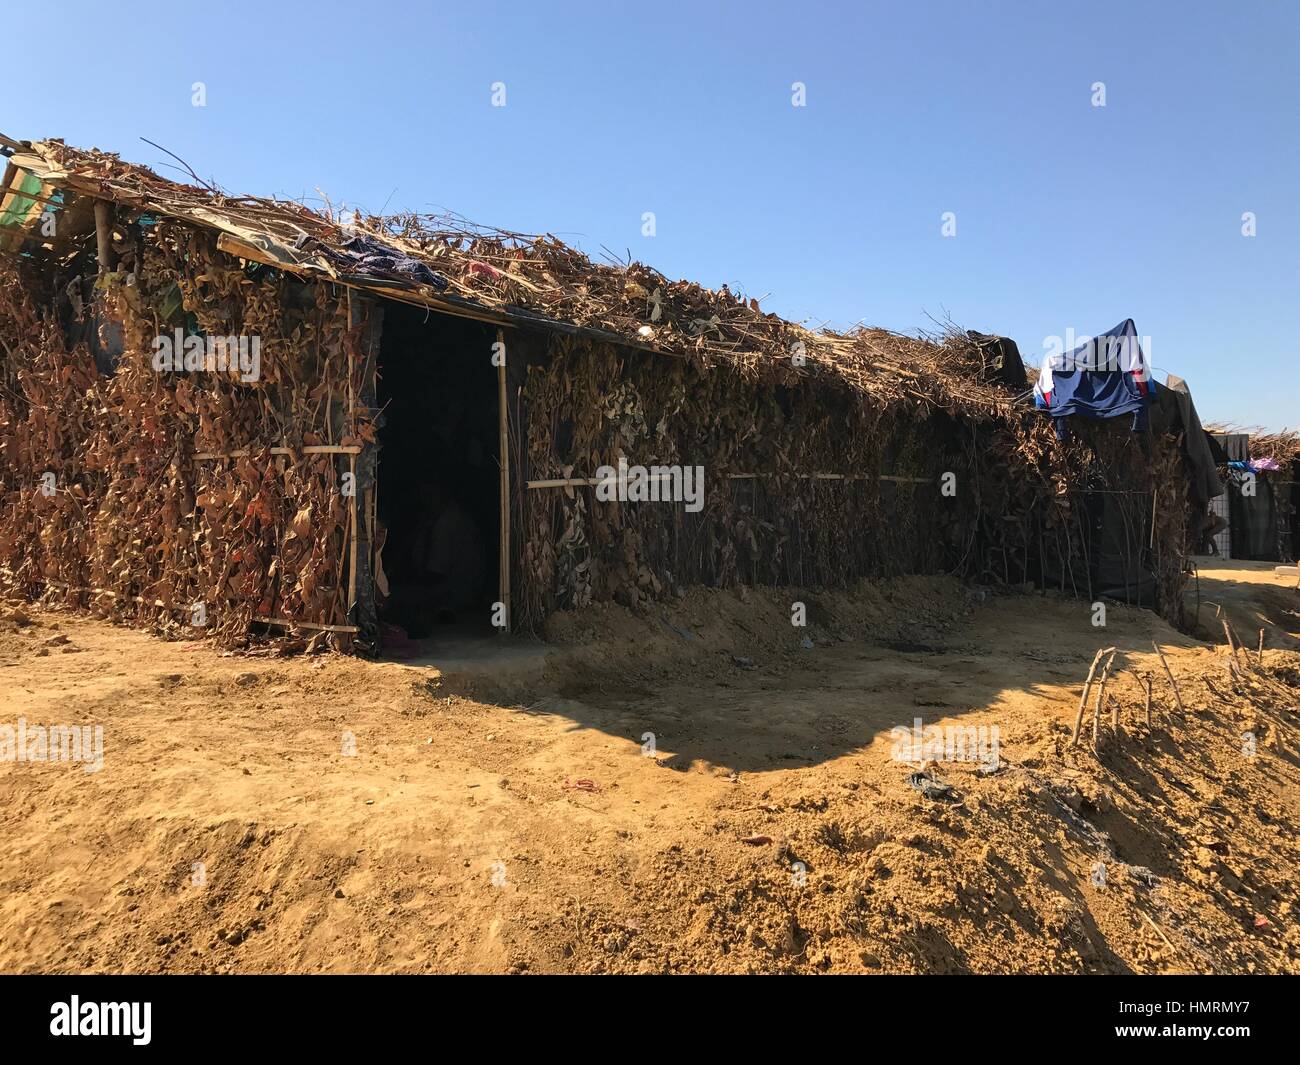 Ukhiya, Bangladesh. 26th Jan, 2017. These makeshift huts, made of bamboo slips and polyethylene papers as roof and covered by tree branches, are built by the Rohingya Muslims who crossed into Bangladesh facing persecution in neighbouring Myanmar. The photograph was taken by Nazrul Islam near Kutupalang refugee camp in Ukhiya sub-district of Cox·s Bazar on January 26, 2017. Photo: Nazrul Islam/dpa/Alamy Live News Stock Photo